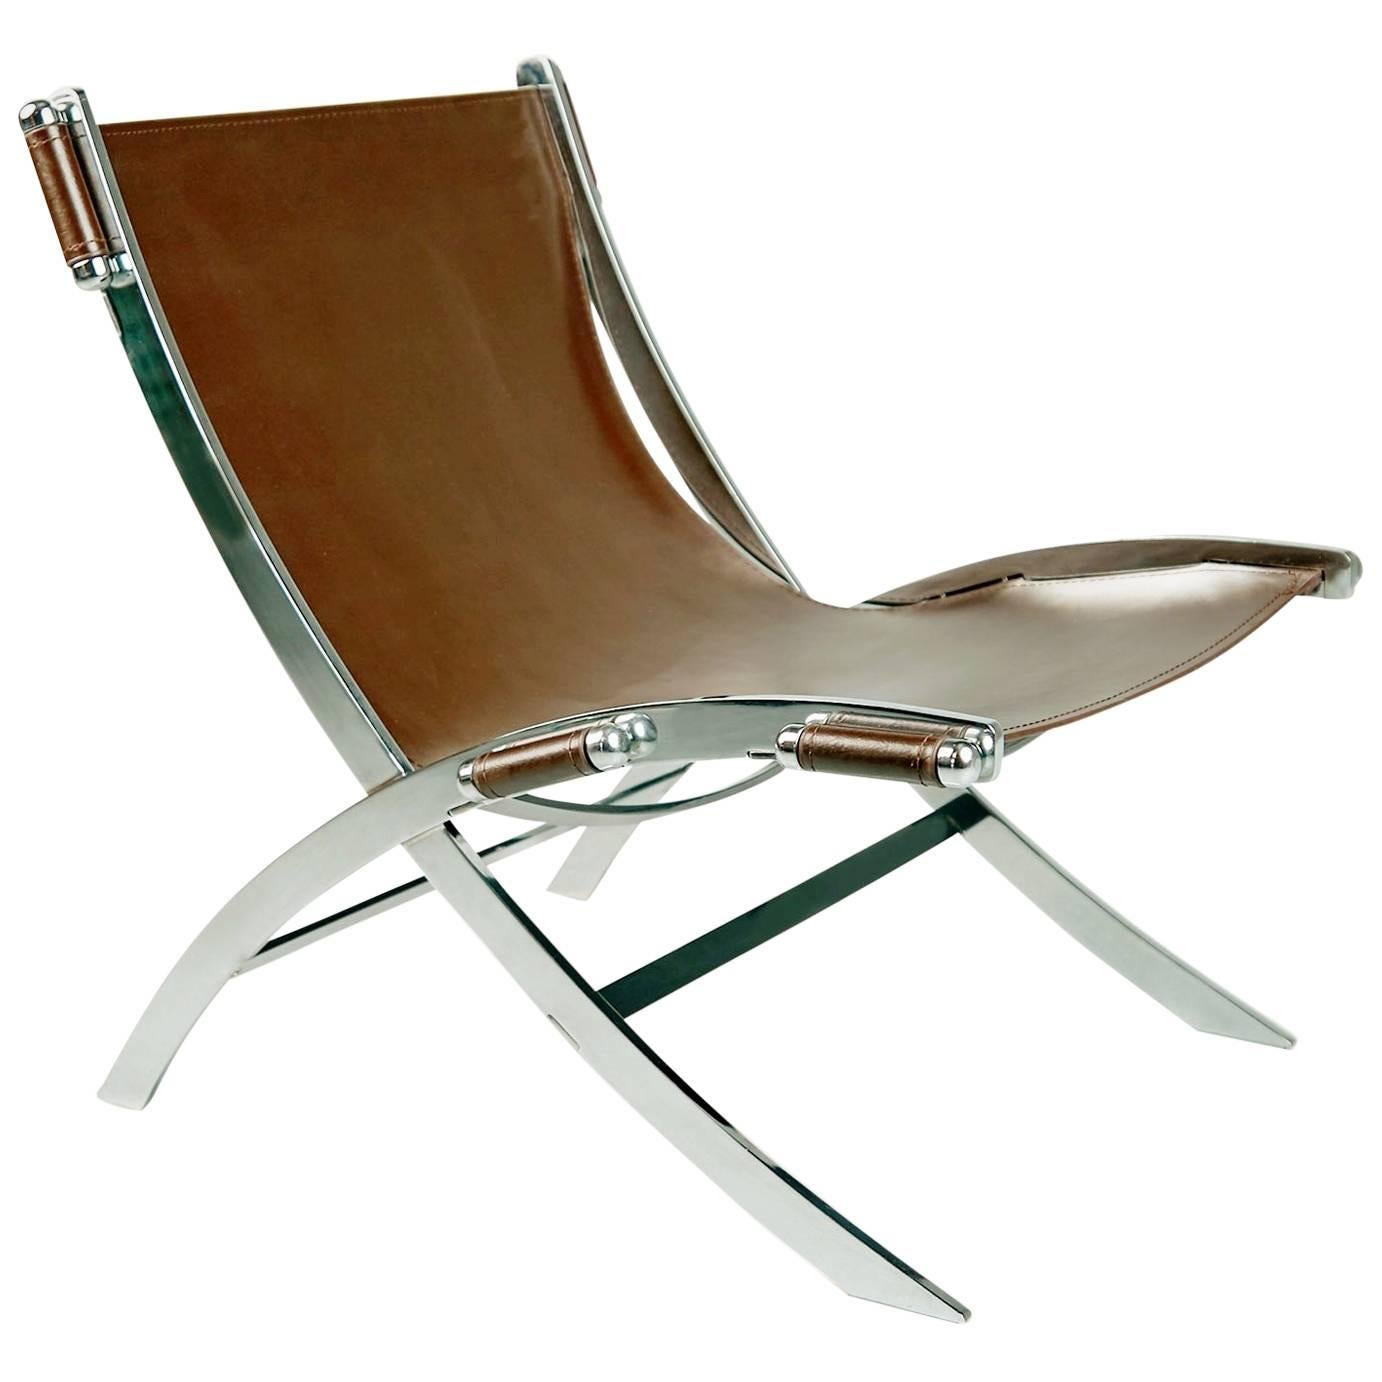 Antonio Citterio Leather Sling 'Timeless' Chair for Flexform Italy